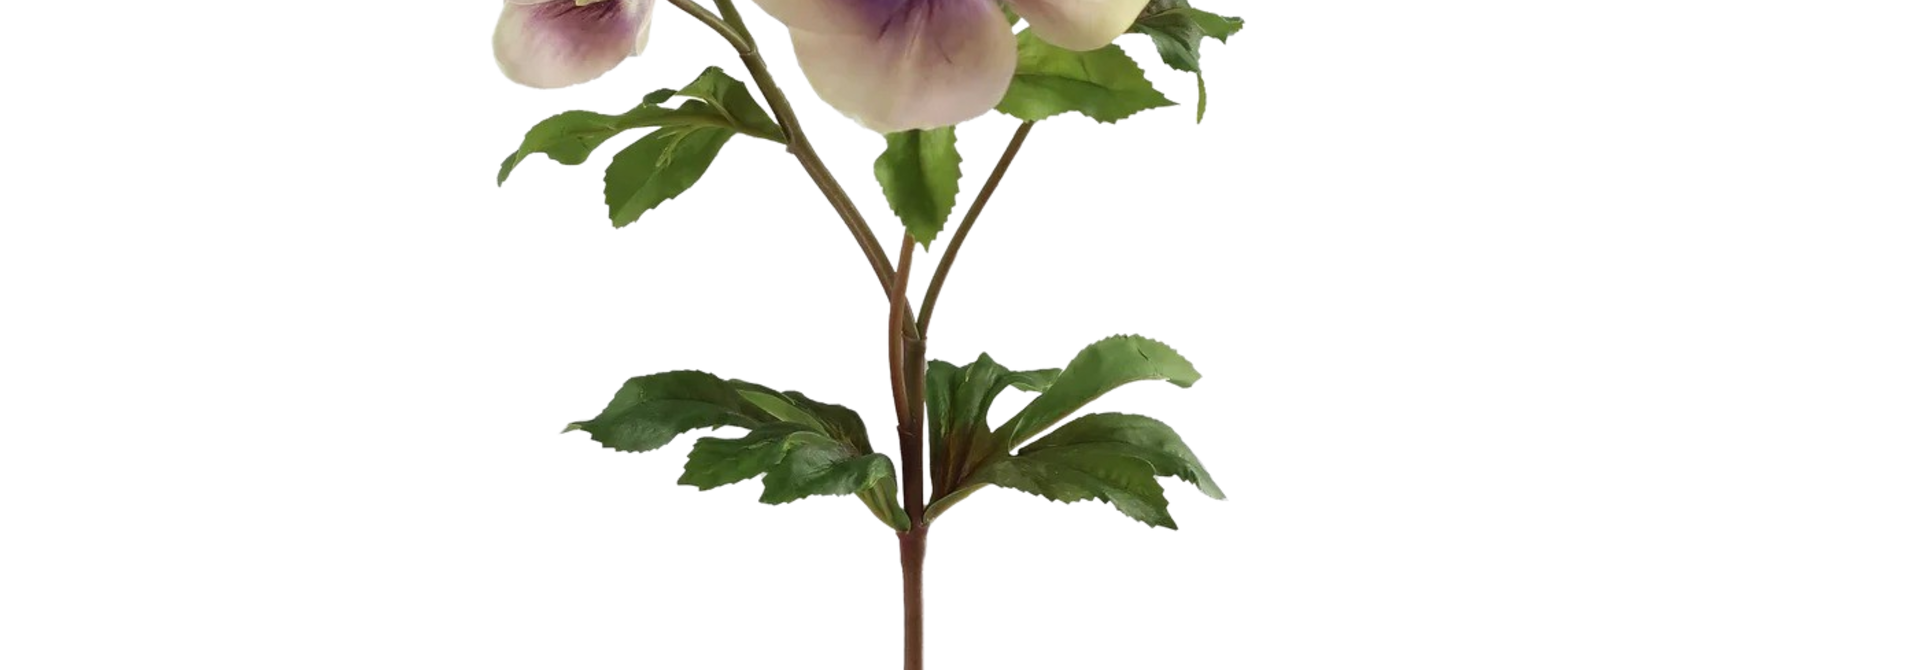 Hellebores | The Floral Collection, Light Pink - 25 Inch